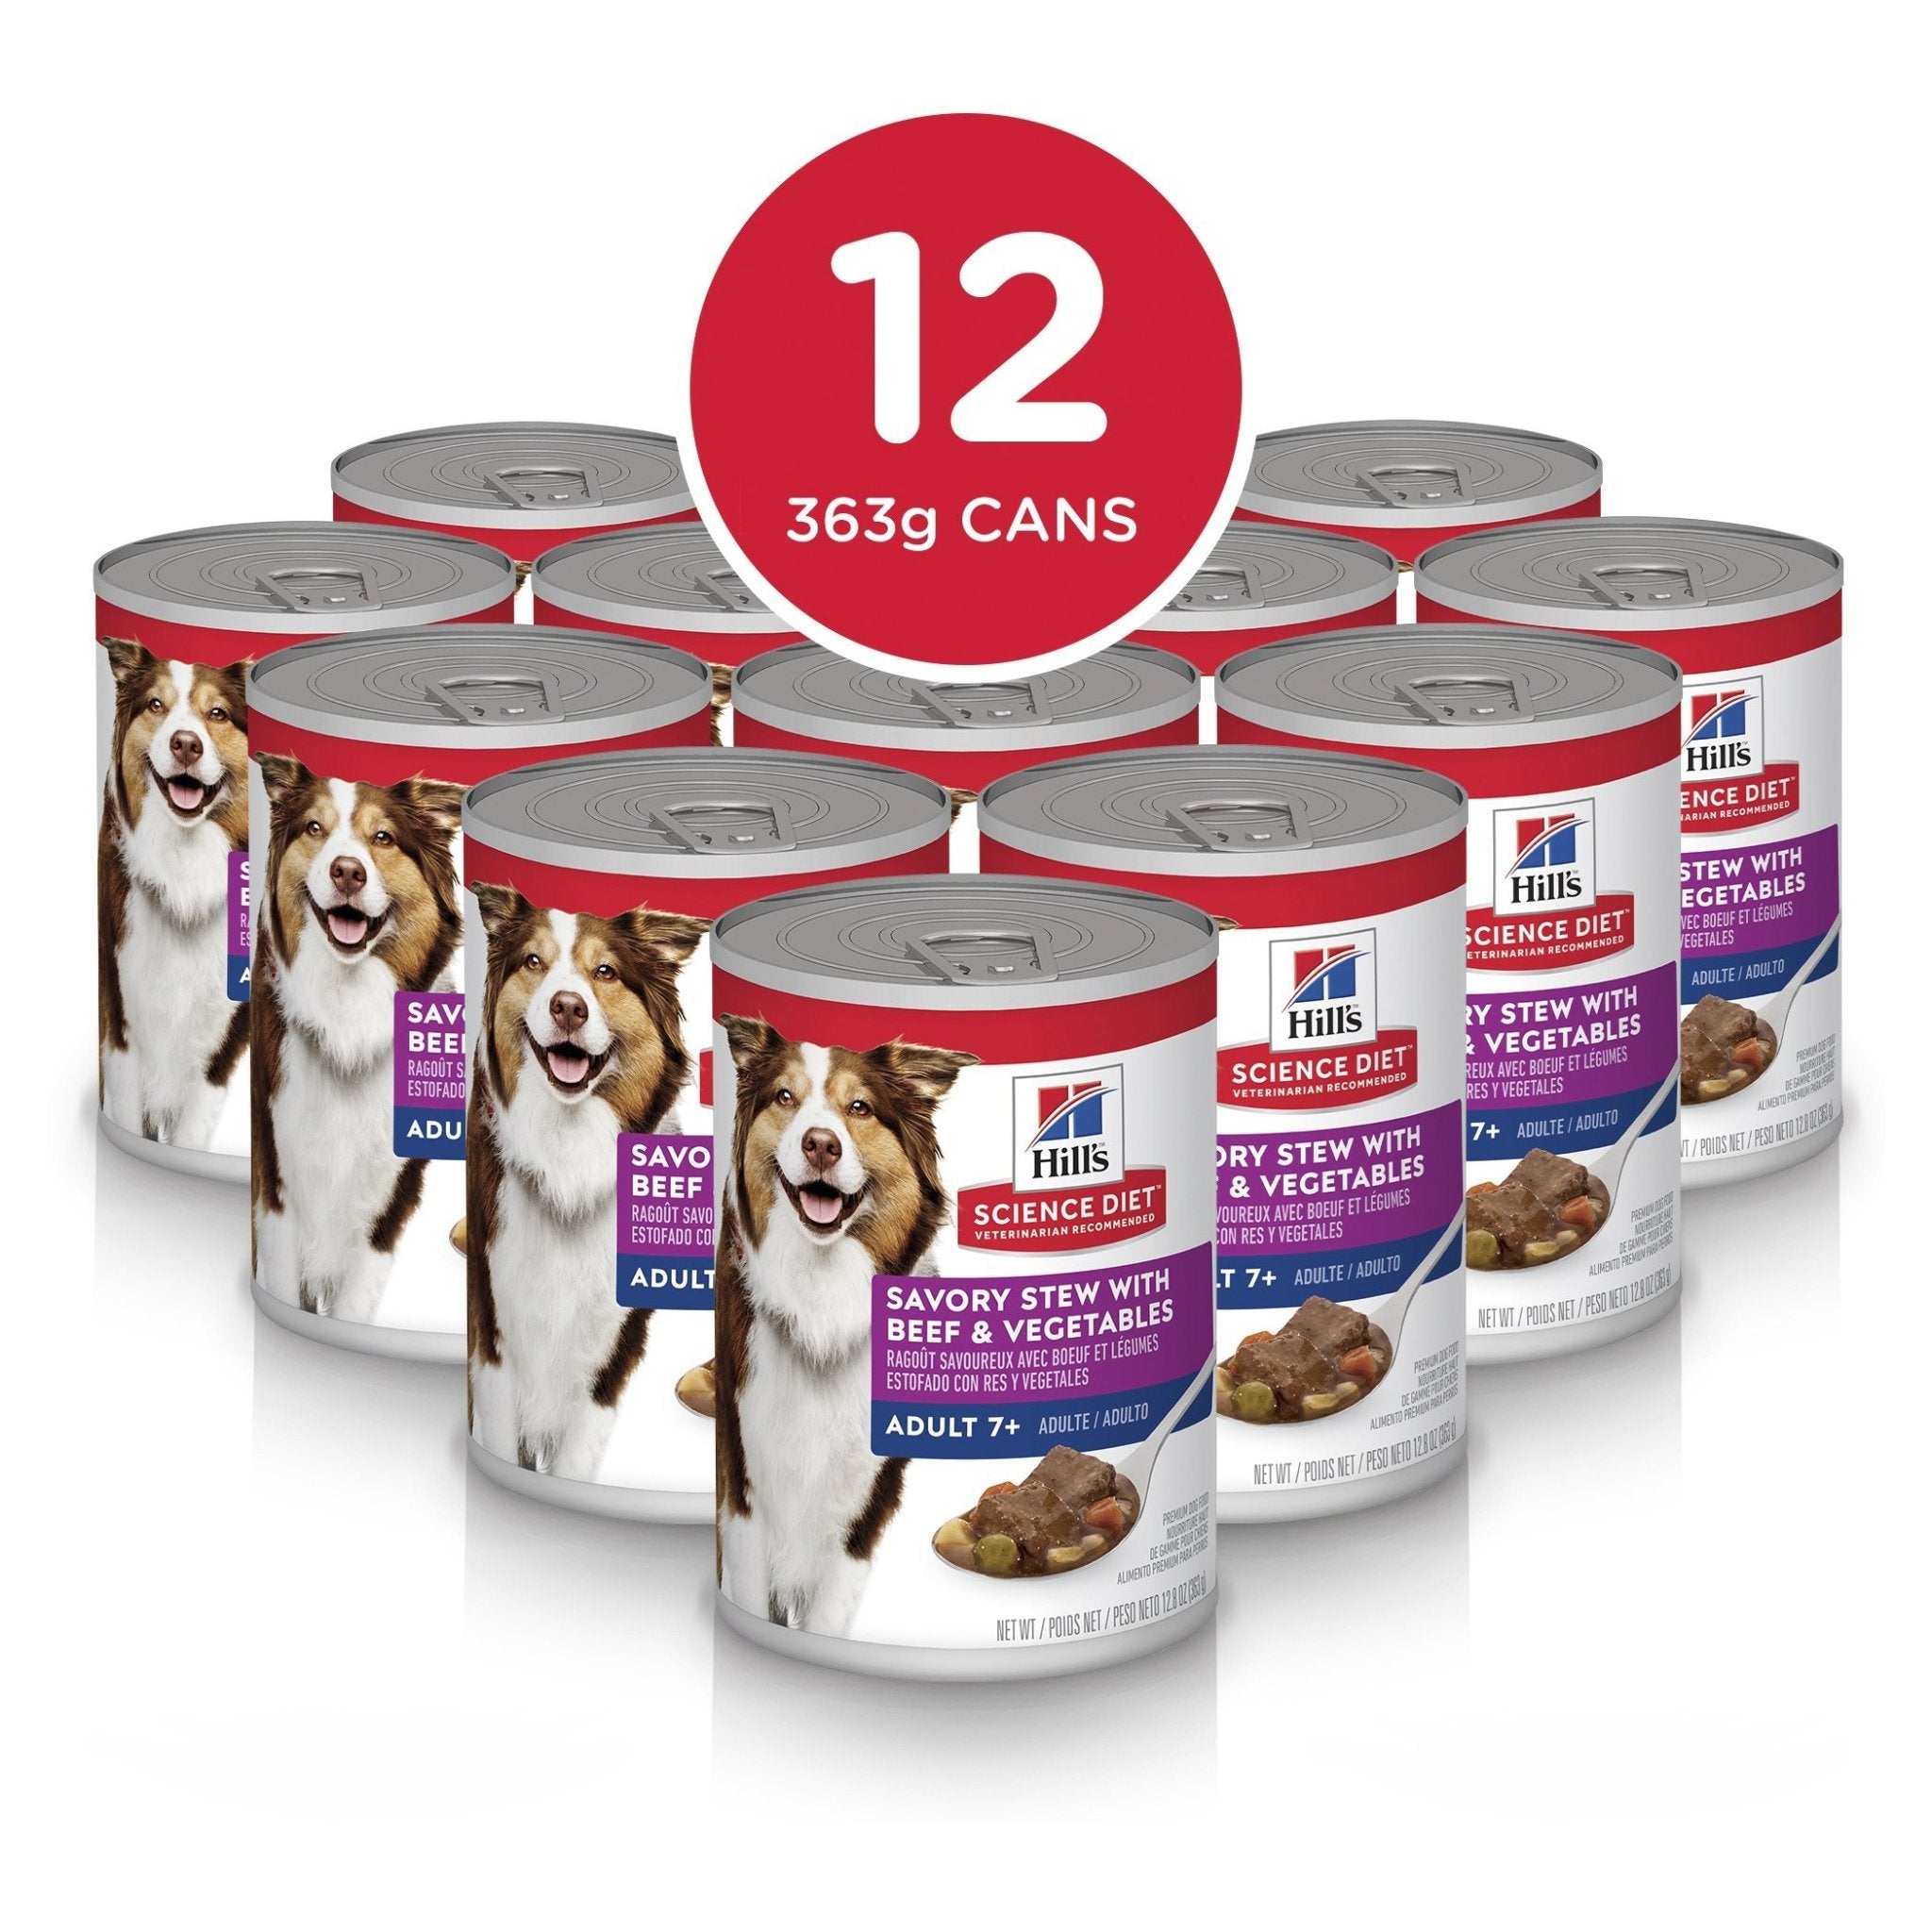 Hill's Science Diet Adult 7+ Savory Stew Beef & Vegetables Canned Dog Food, 363g, 12 Pack